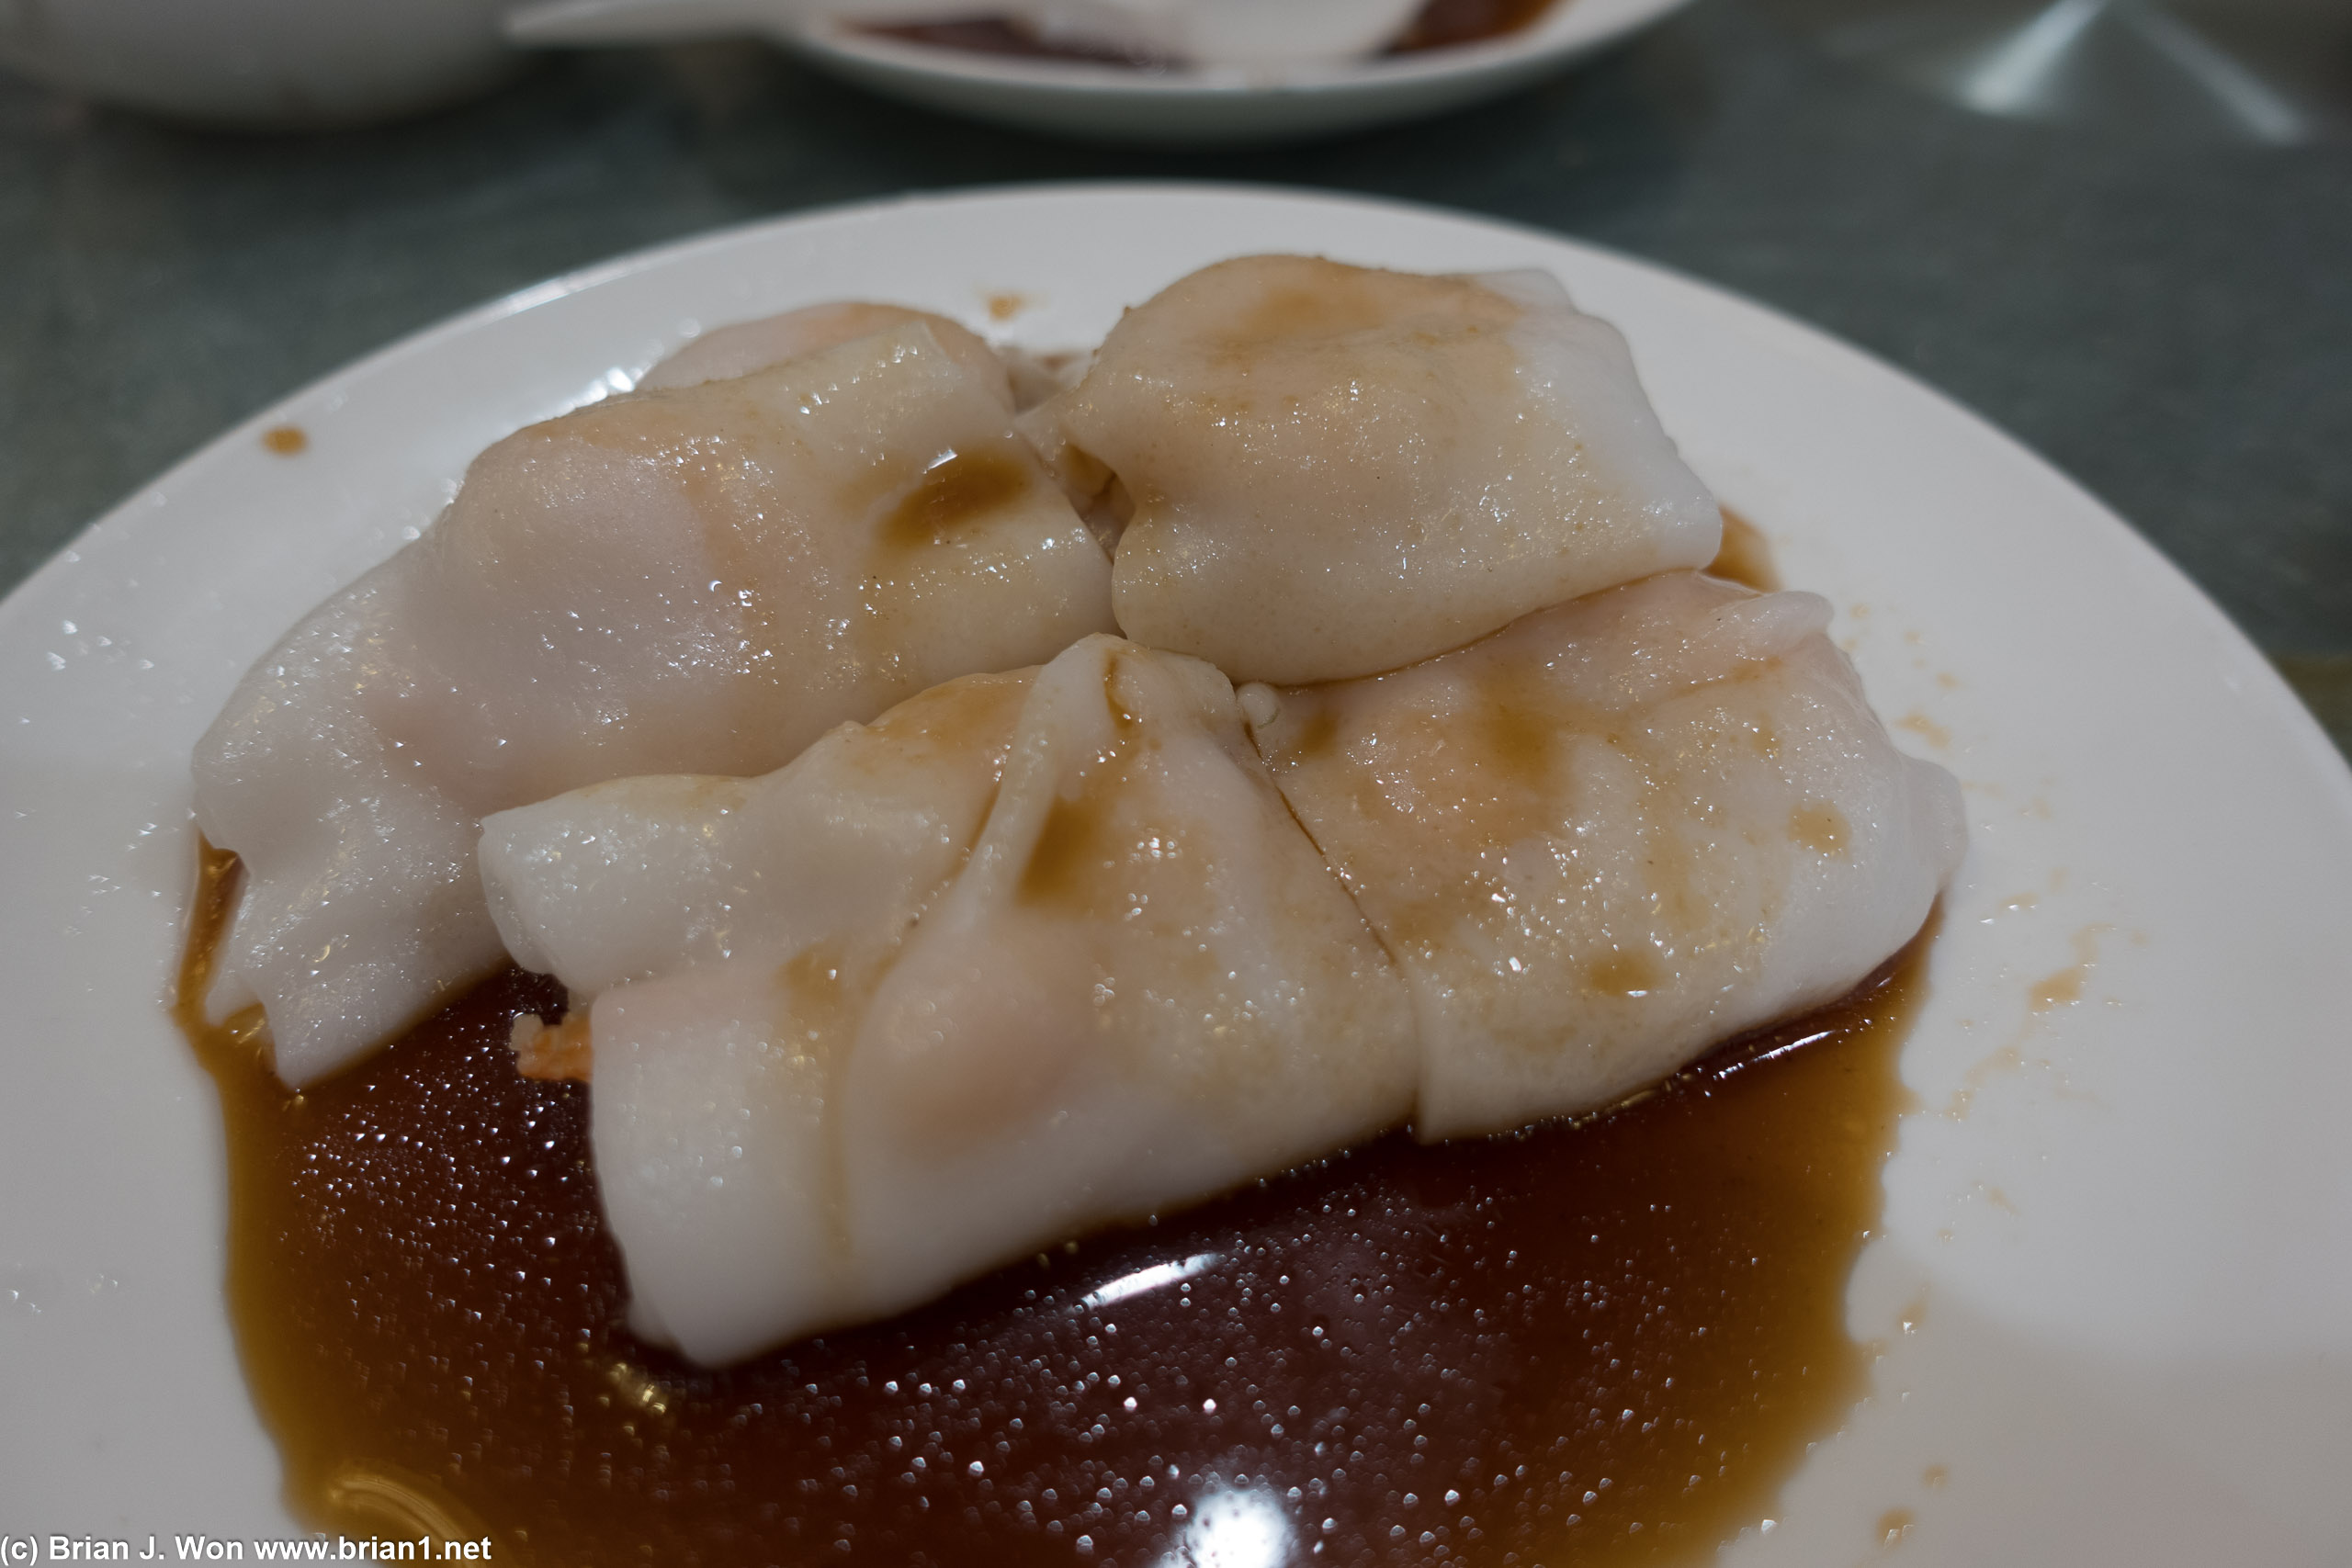 Har cheung fun were okay, taste was right, skins too thick.